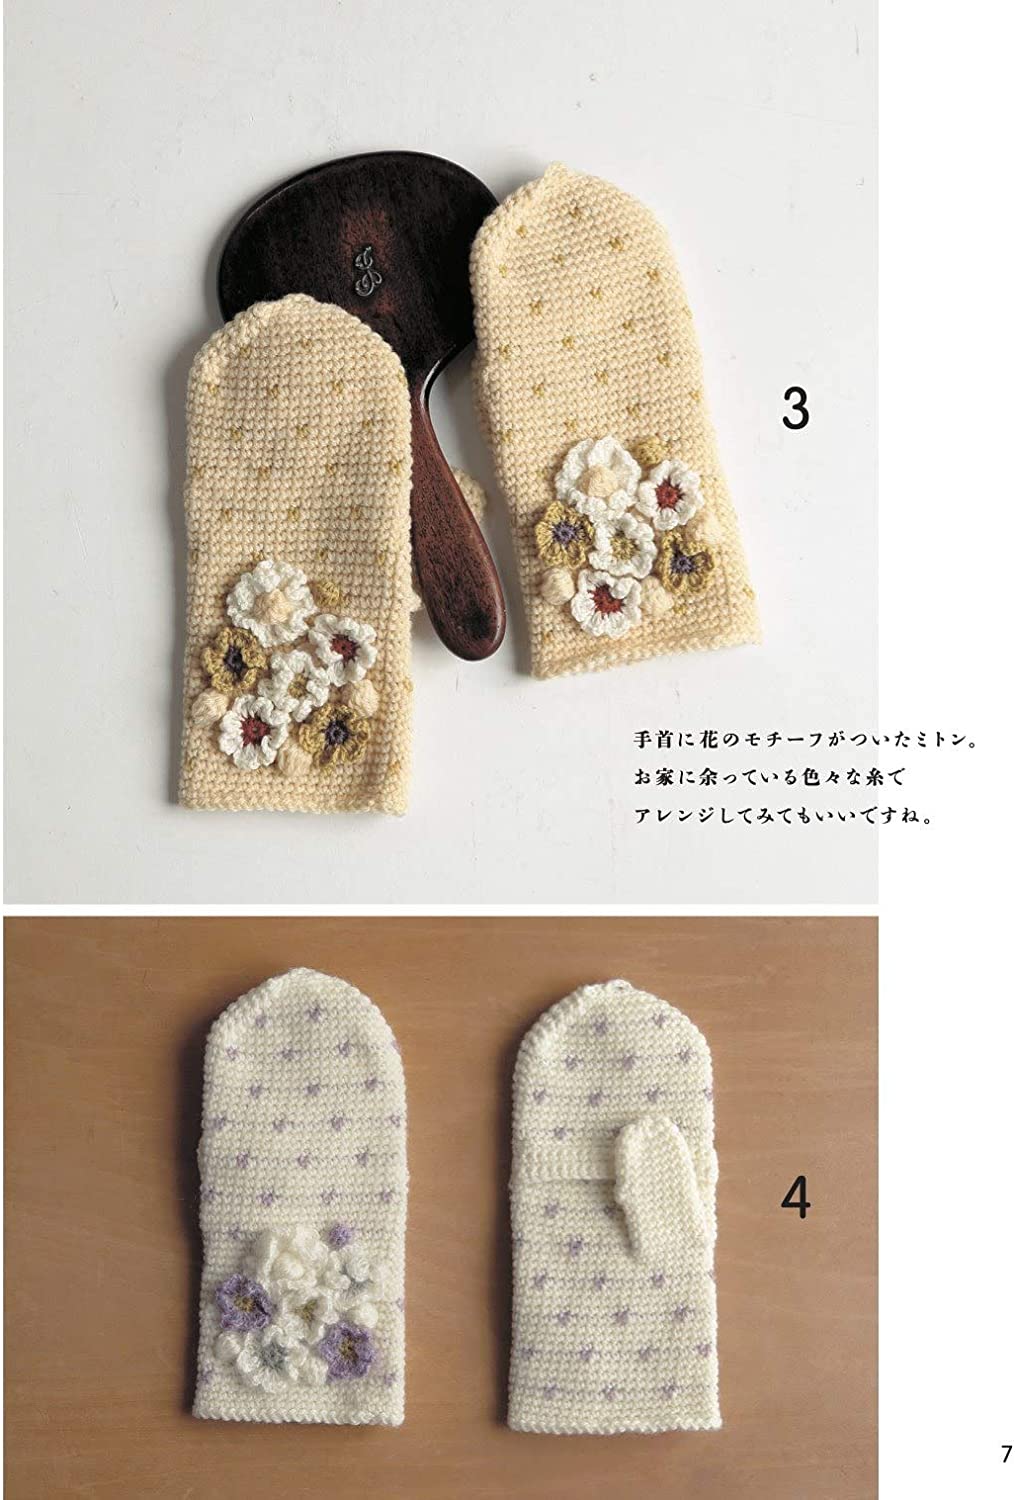 Practical knitting faster than stick needles! Crochet mittens with fingertips